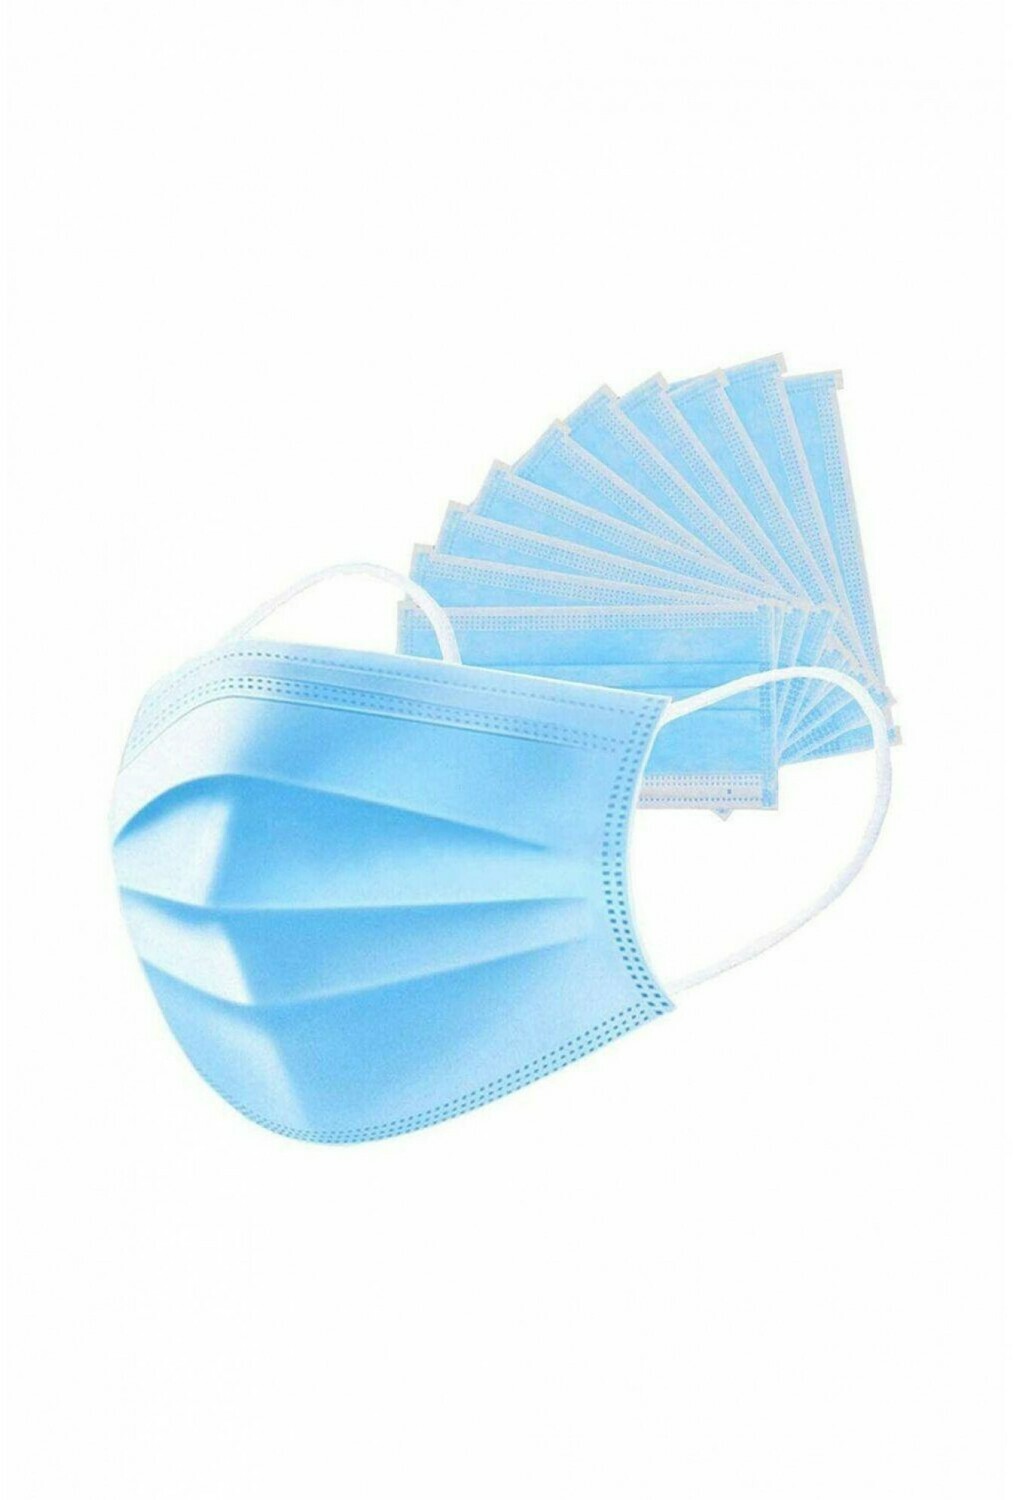 3 ply surgical type mask with ear loops (pack of 10)